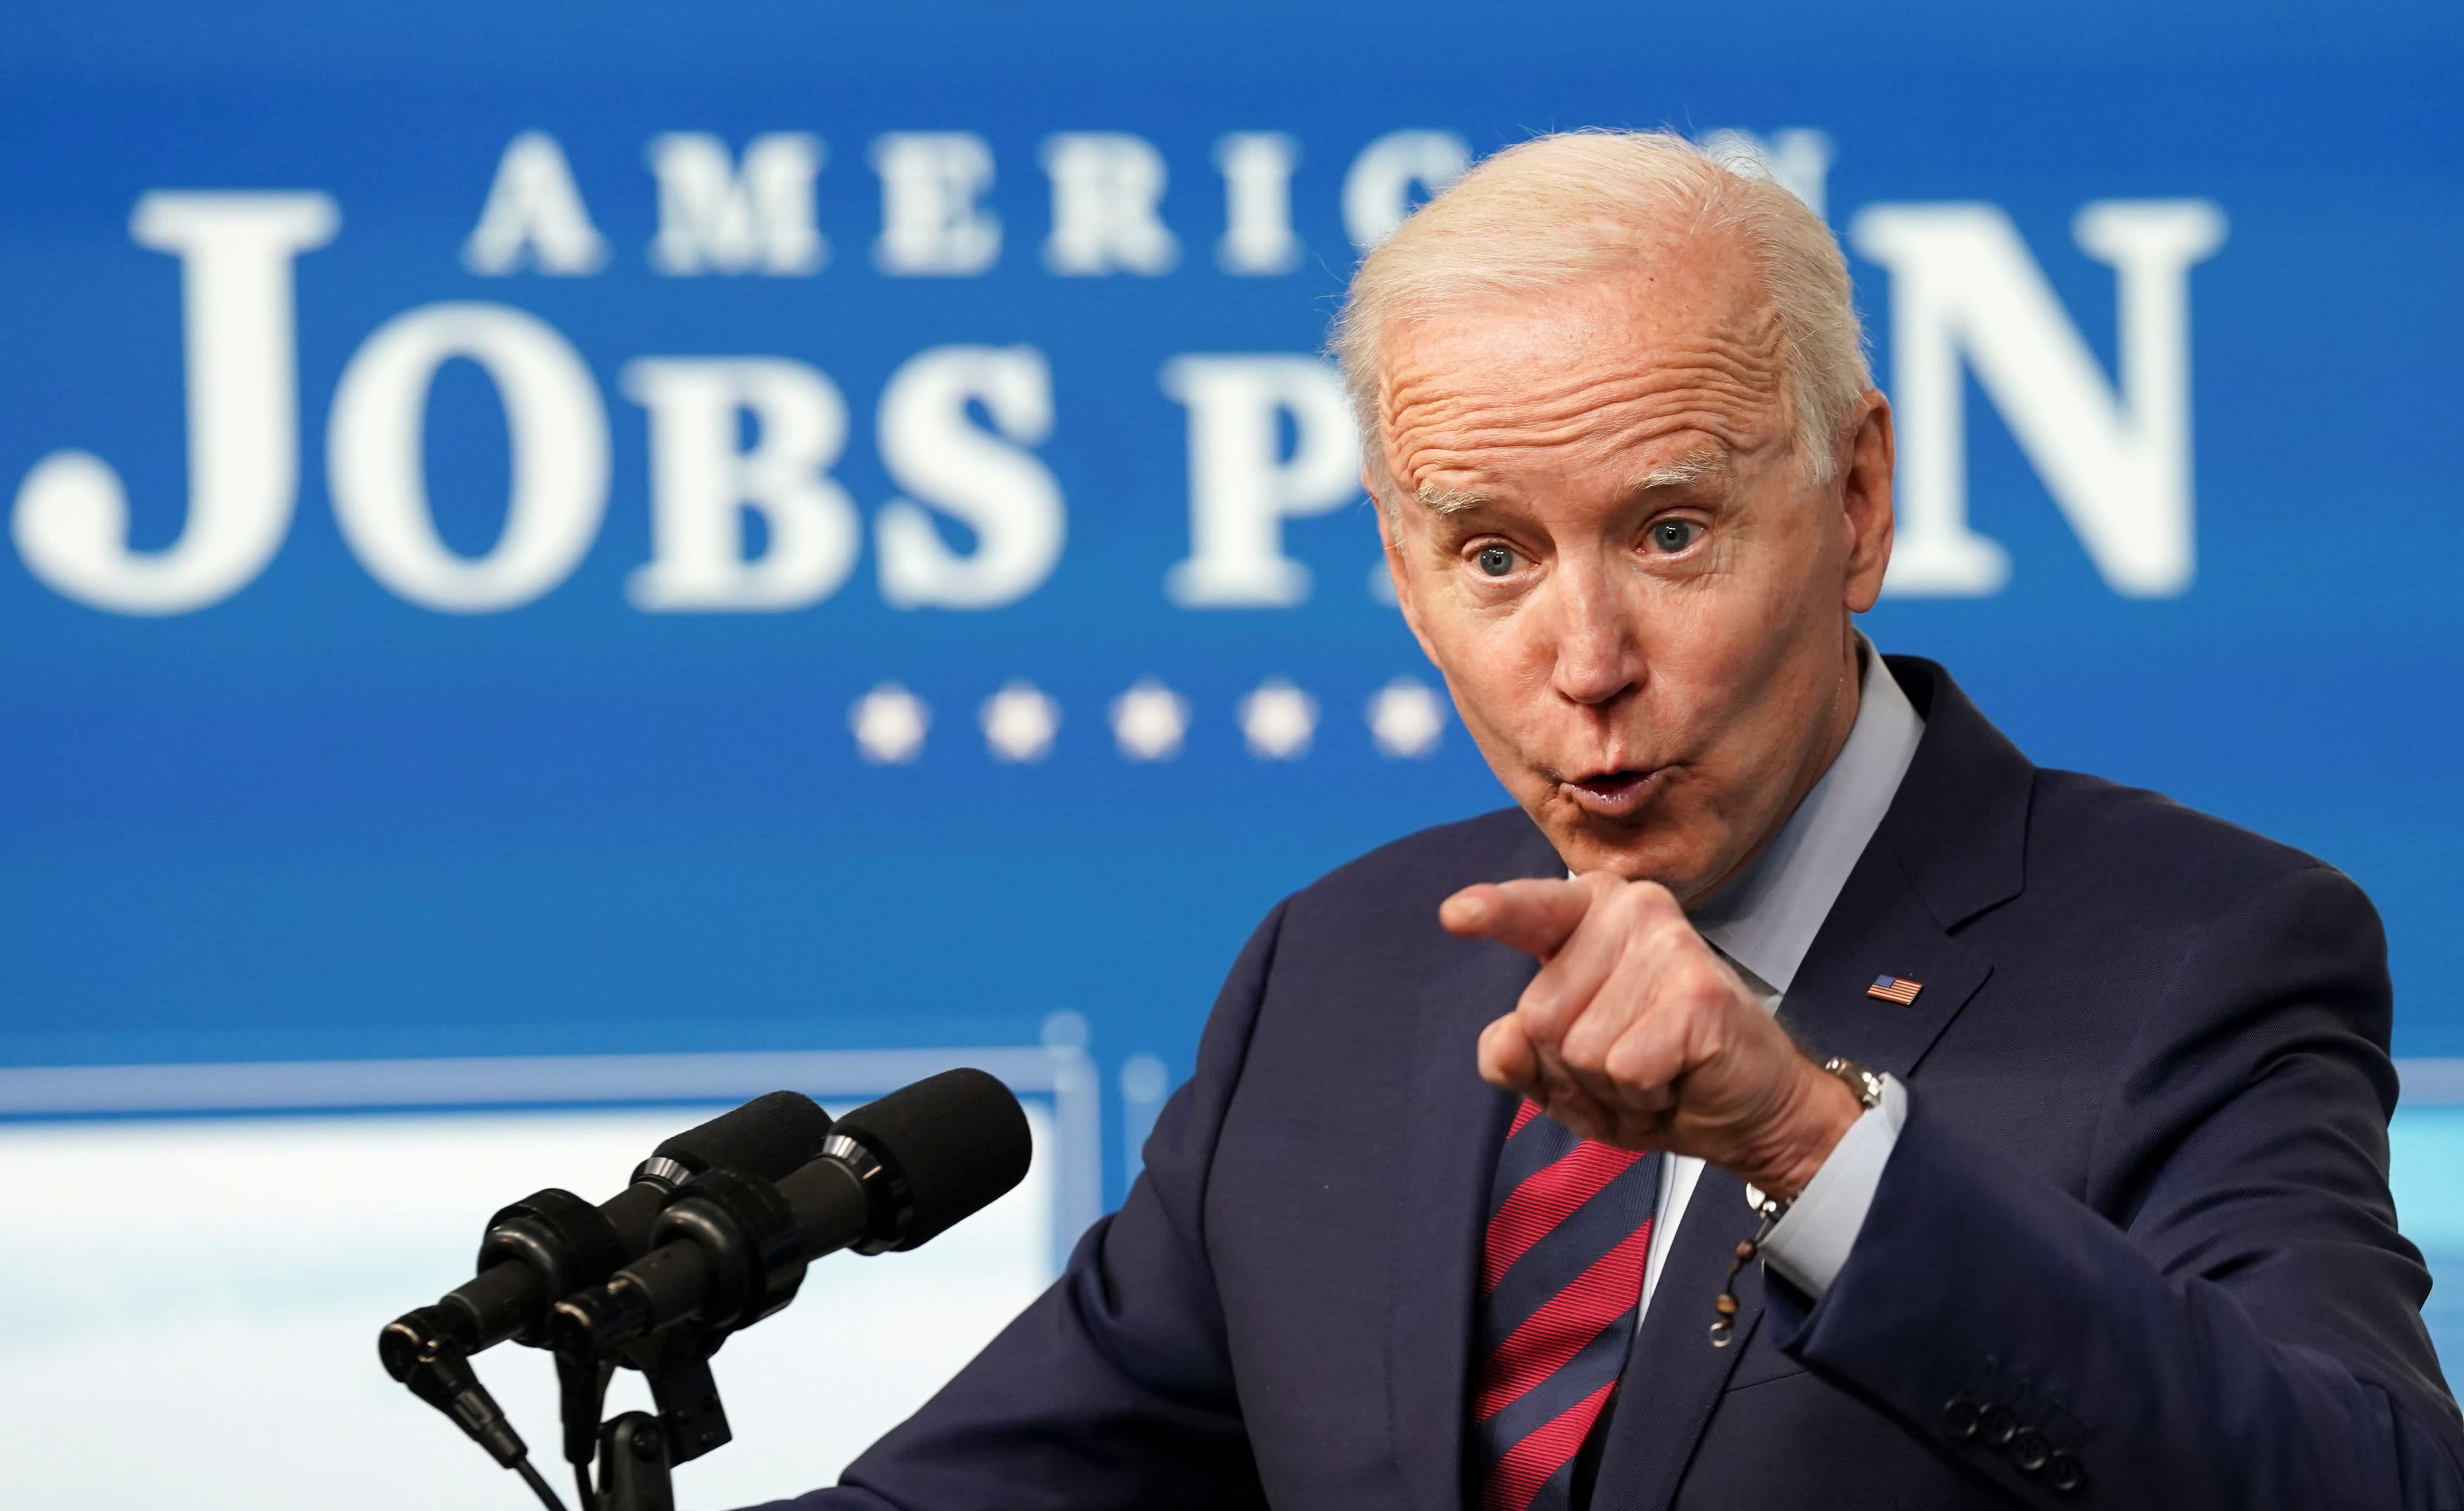 Biden open to negotiating a corporate tax hike, but says US should take bold steps on infrastructure